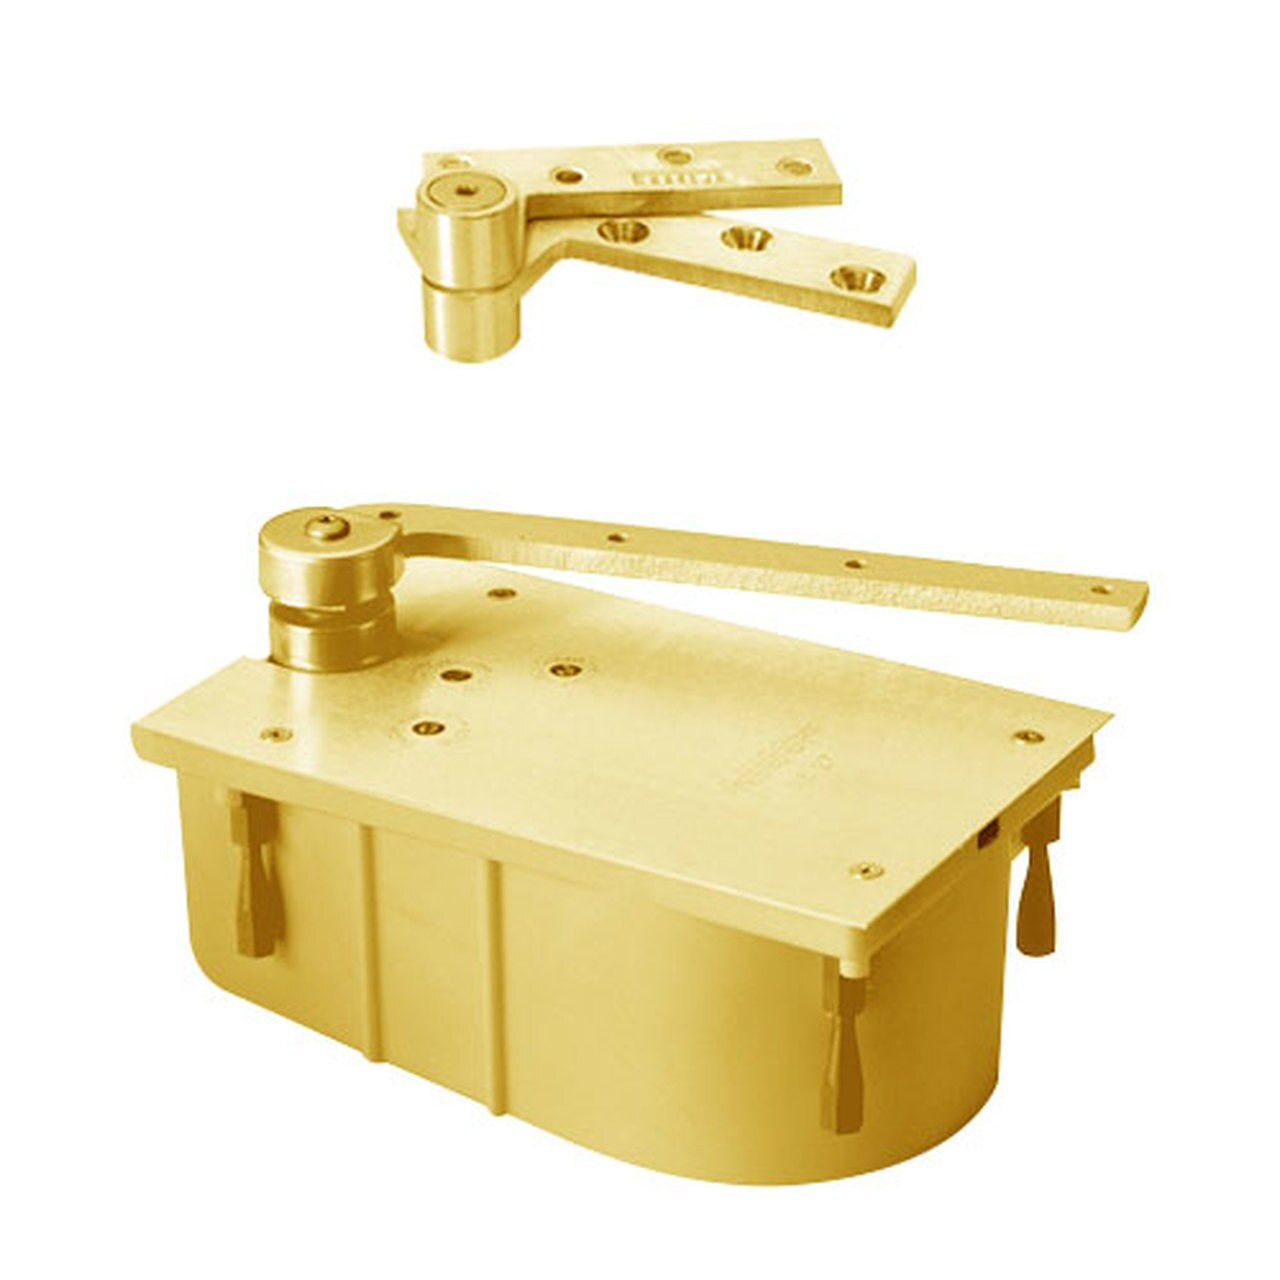 127-95N-LCC-LH-605 Rixson 27 Series Heavy Duty 3/4" Offset Hung Floor Closer in Bright Brass Finish